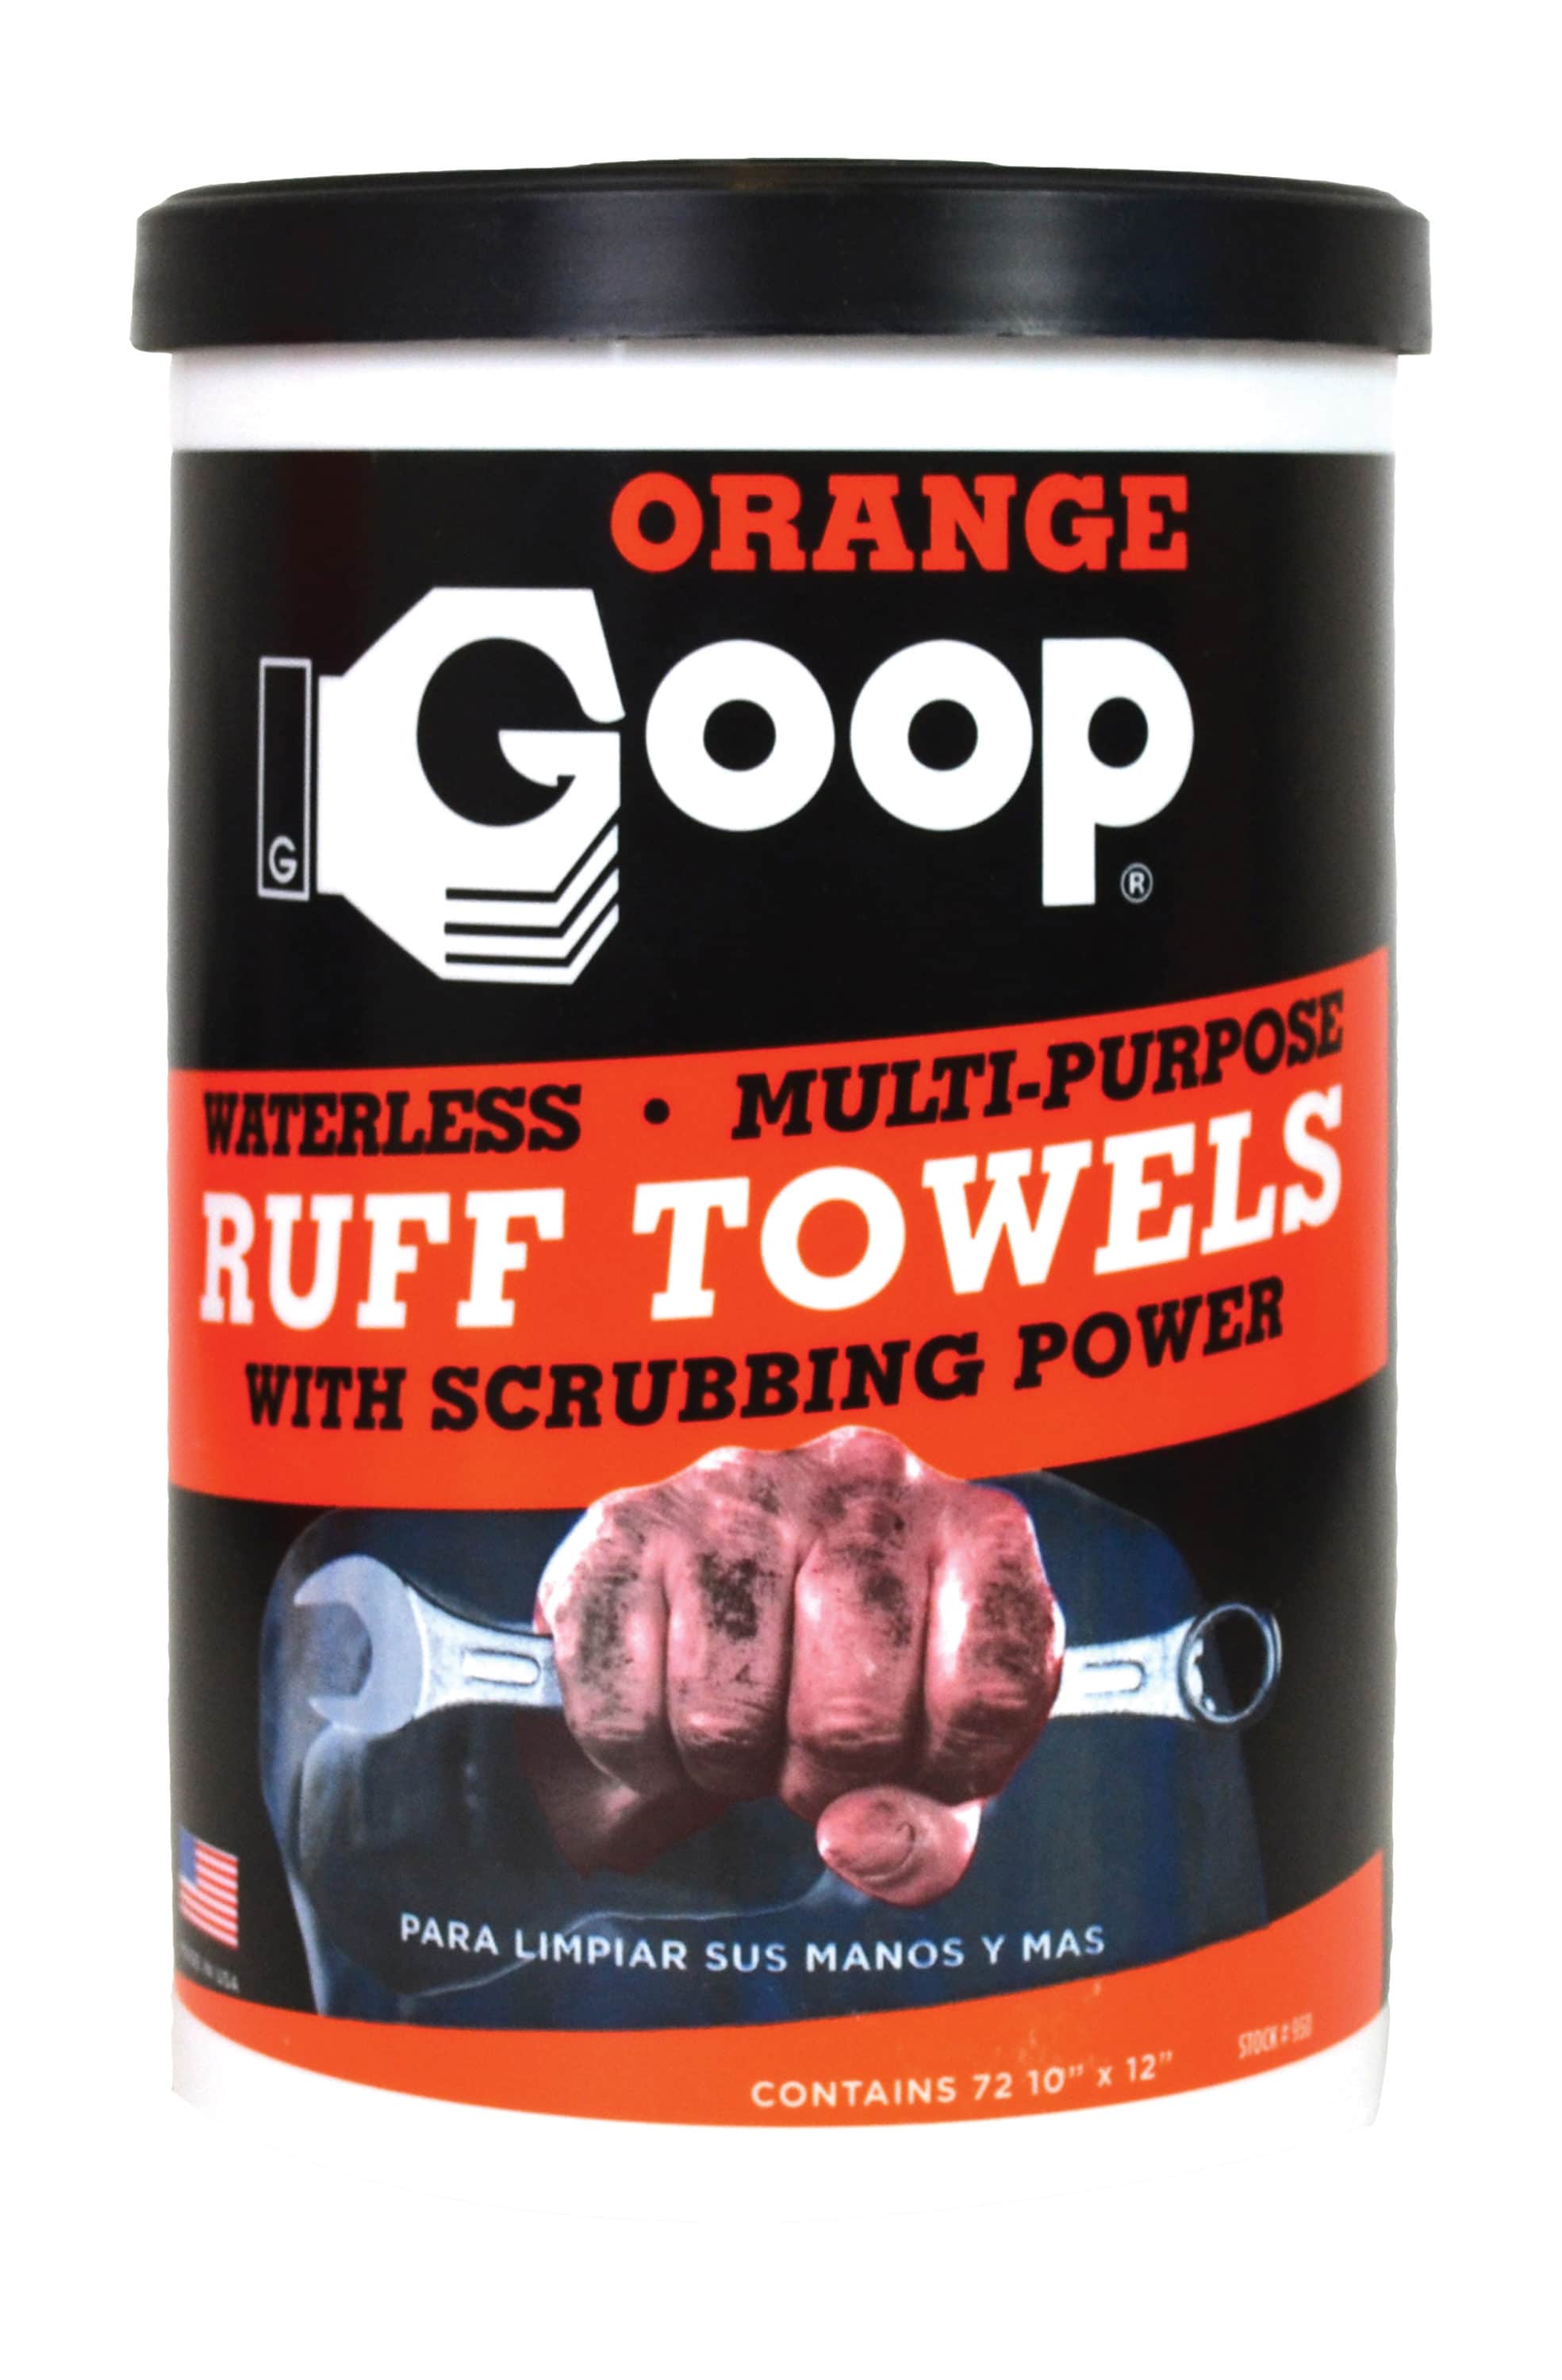 Goop Towels & Wipes — Goop Hand Cleaner and All Goop Cleaning Products